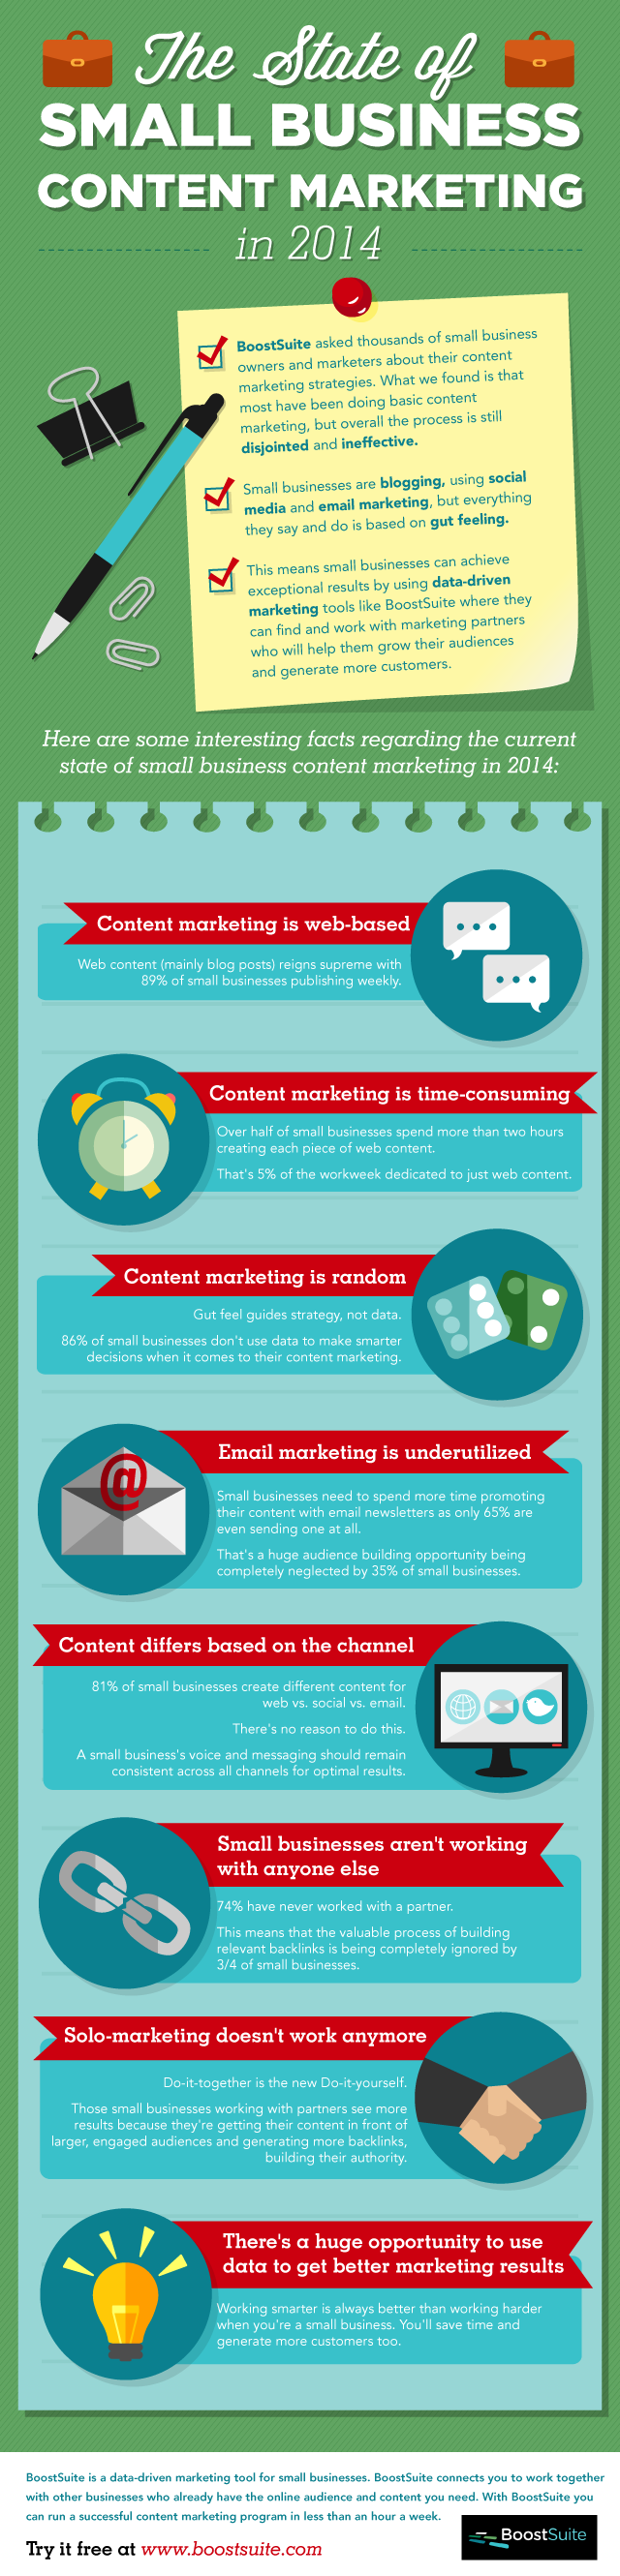 The State of Small Business Content Marketing 2014